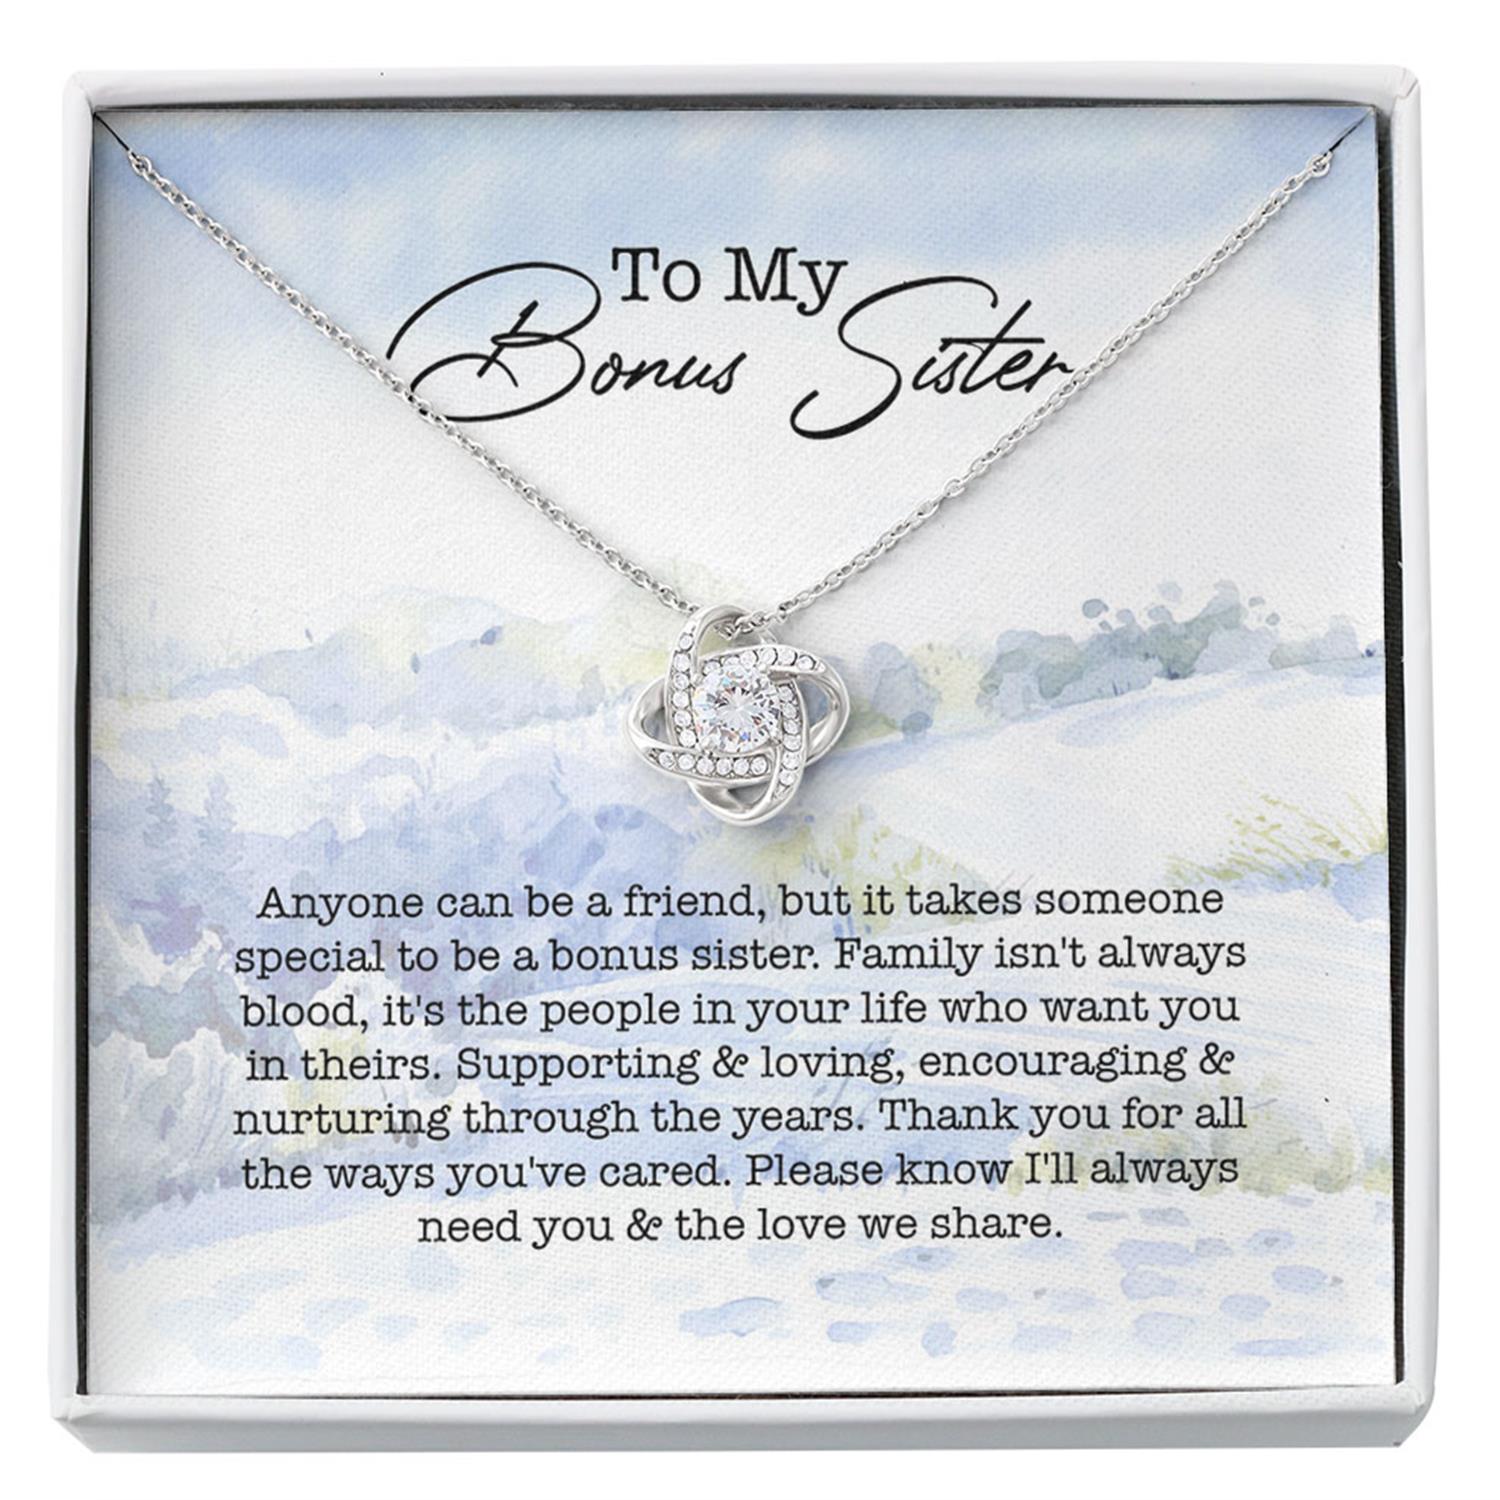 Bonus Sister Necklace, Bonus Sister Gift, Sister In Law Gift, Adoptive Sister Gift, Step Sister Necklace, BFF Gifts, Bridesmaid Custom Necklace